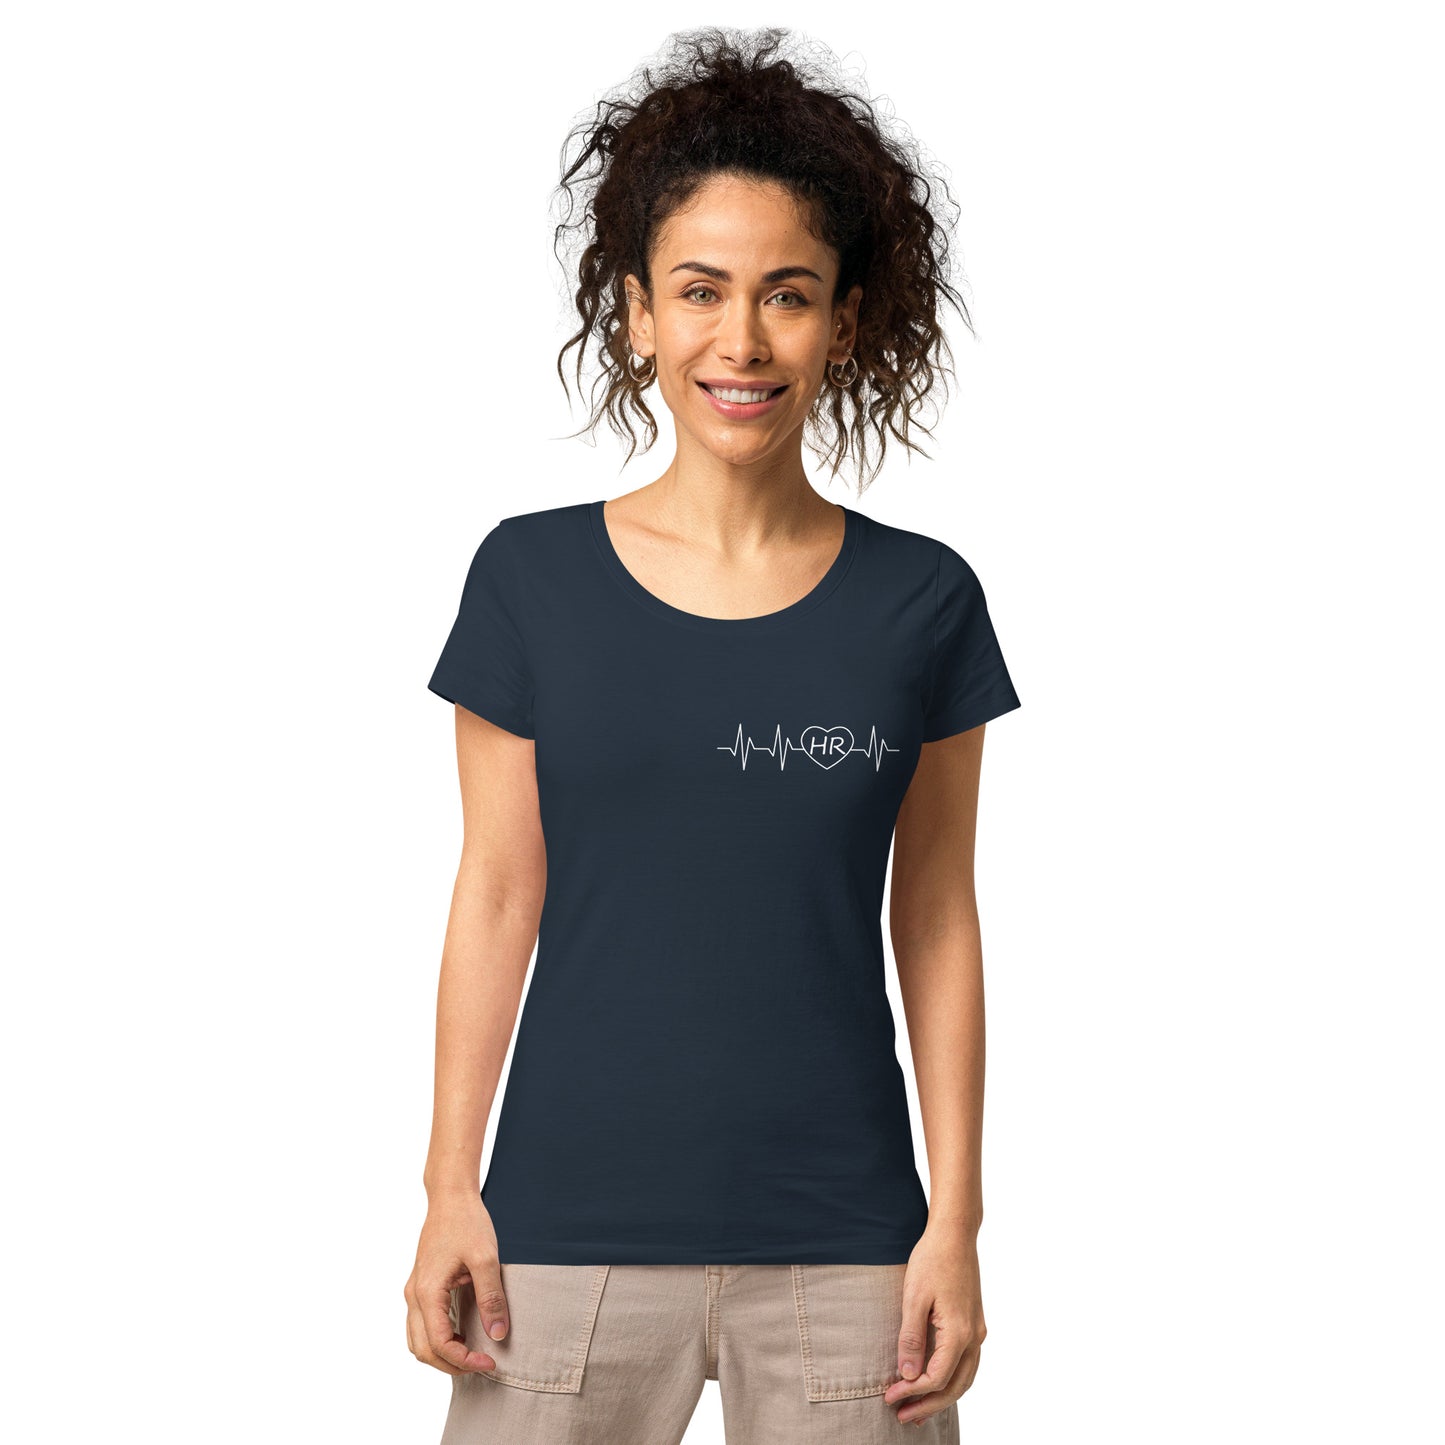 Women's fitted T-shirt: "I love human resources", with heartbeats